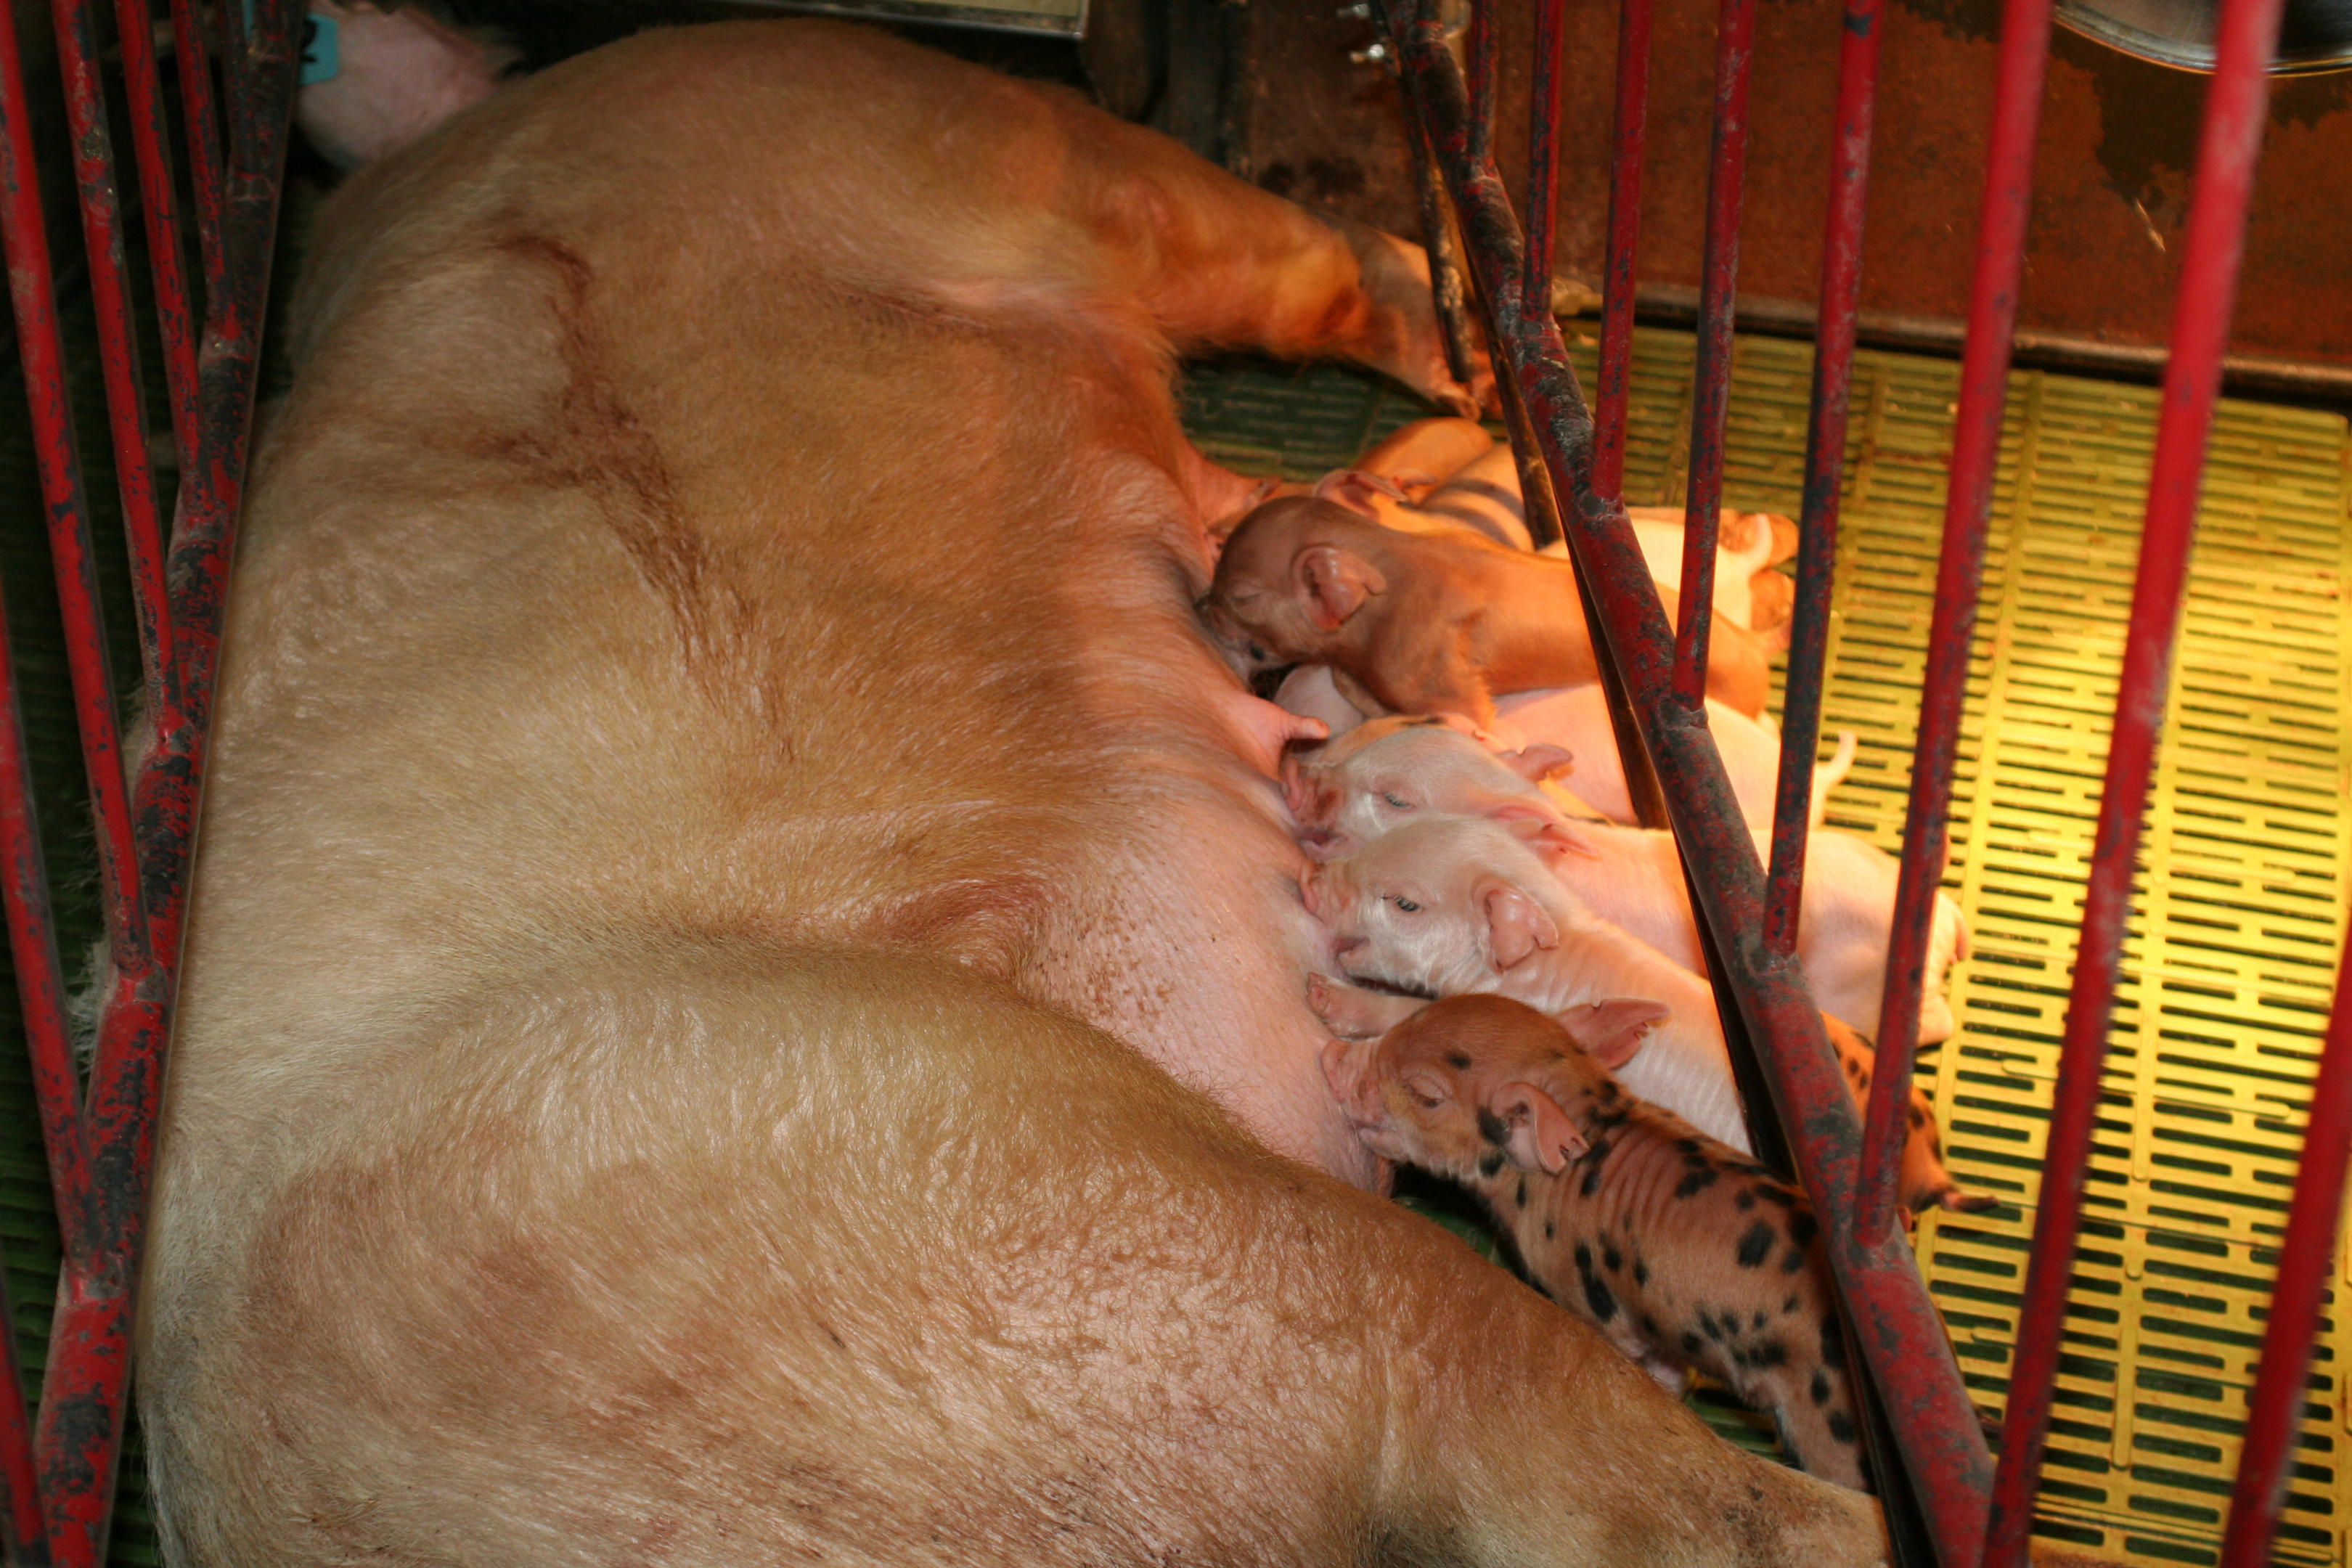 Sow farrowing crates would be banned under the Labour Party’s proposals.